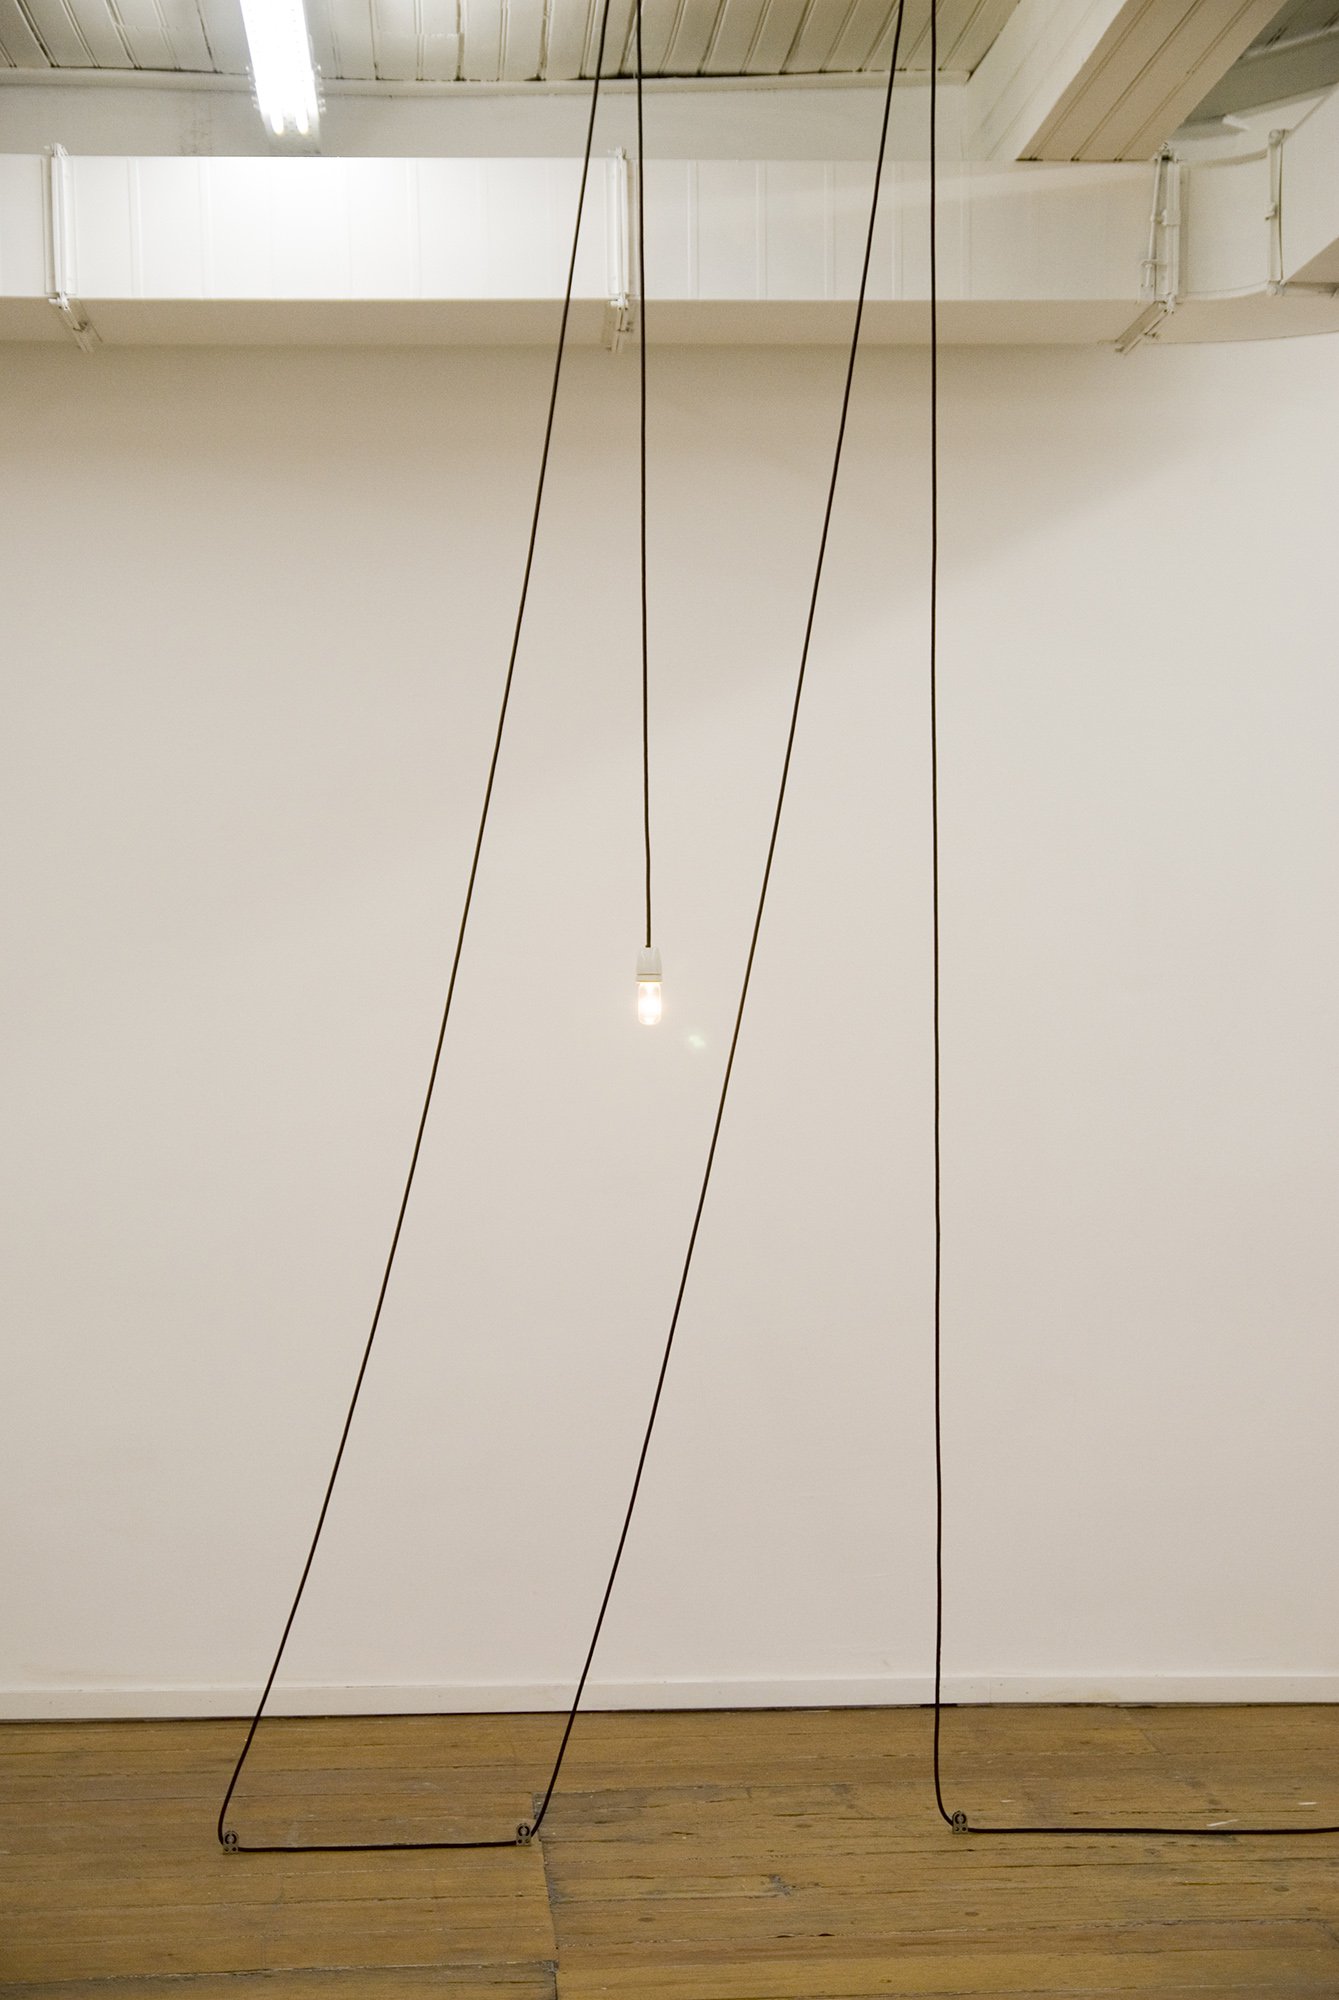 Giles Round, From wine jugs to lighting fittings; M, black braded electrical flex, lamp and pulleys, 2008. Installation view, Children of the Revolution, Rodeo, Istanbul, 2008